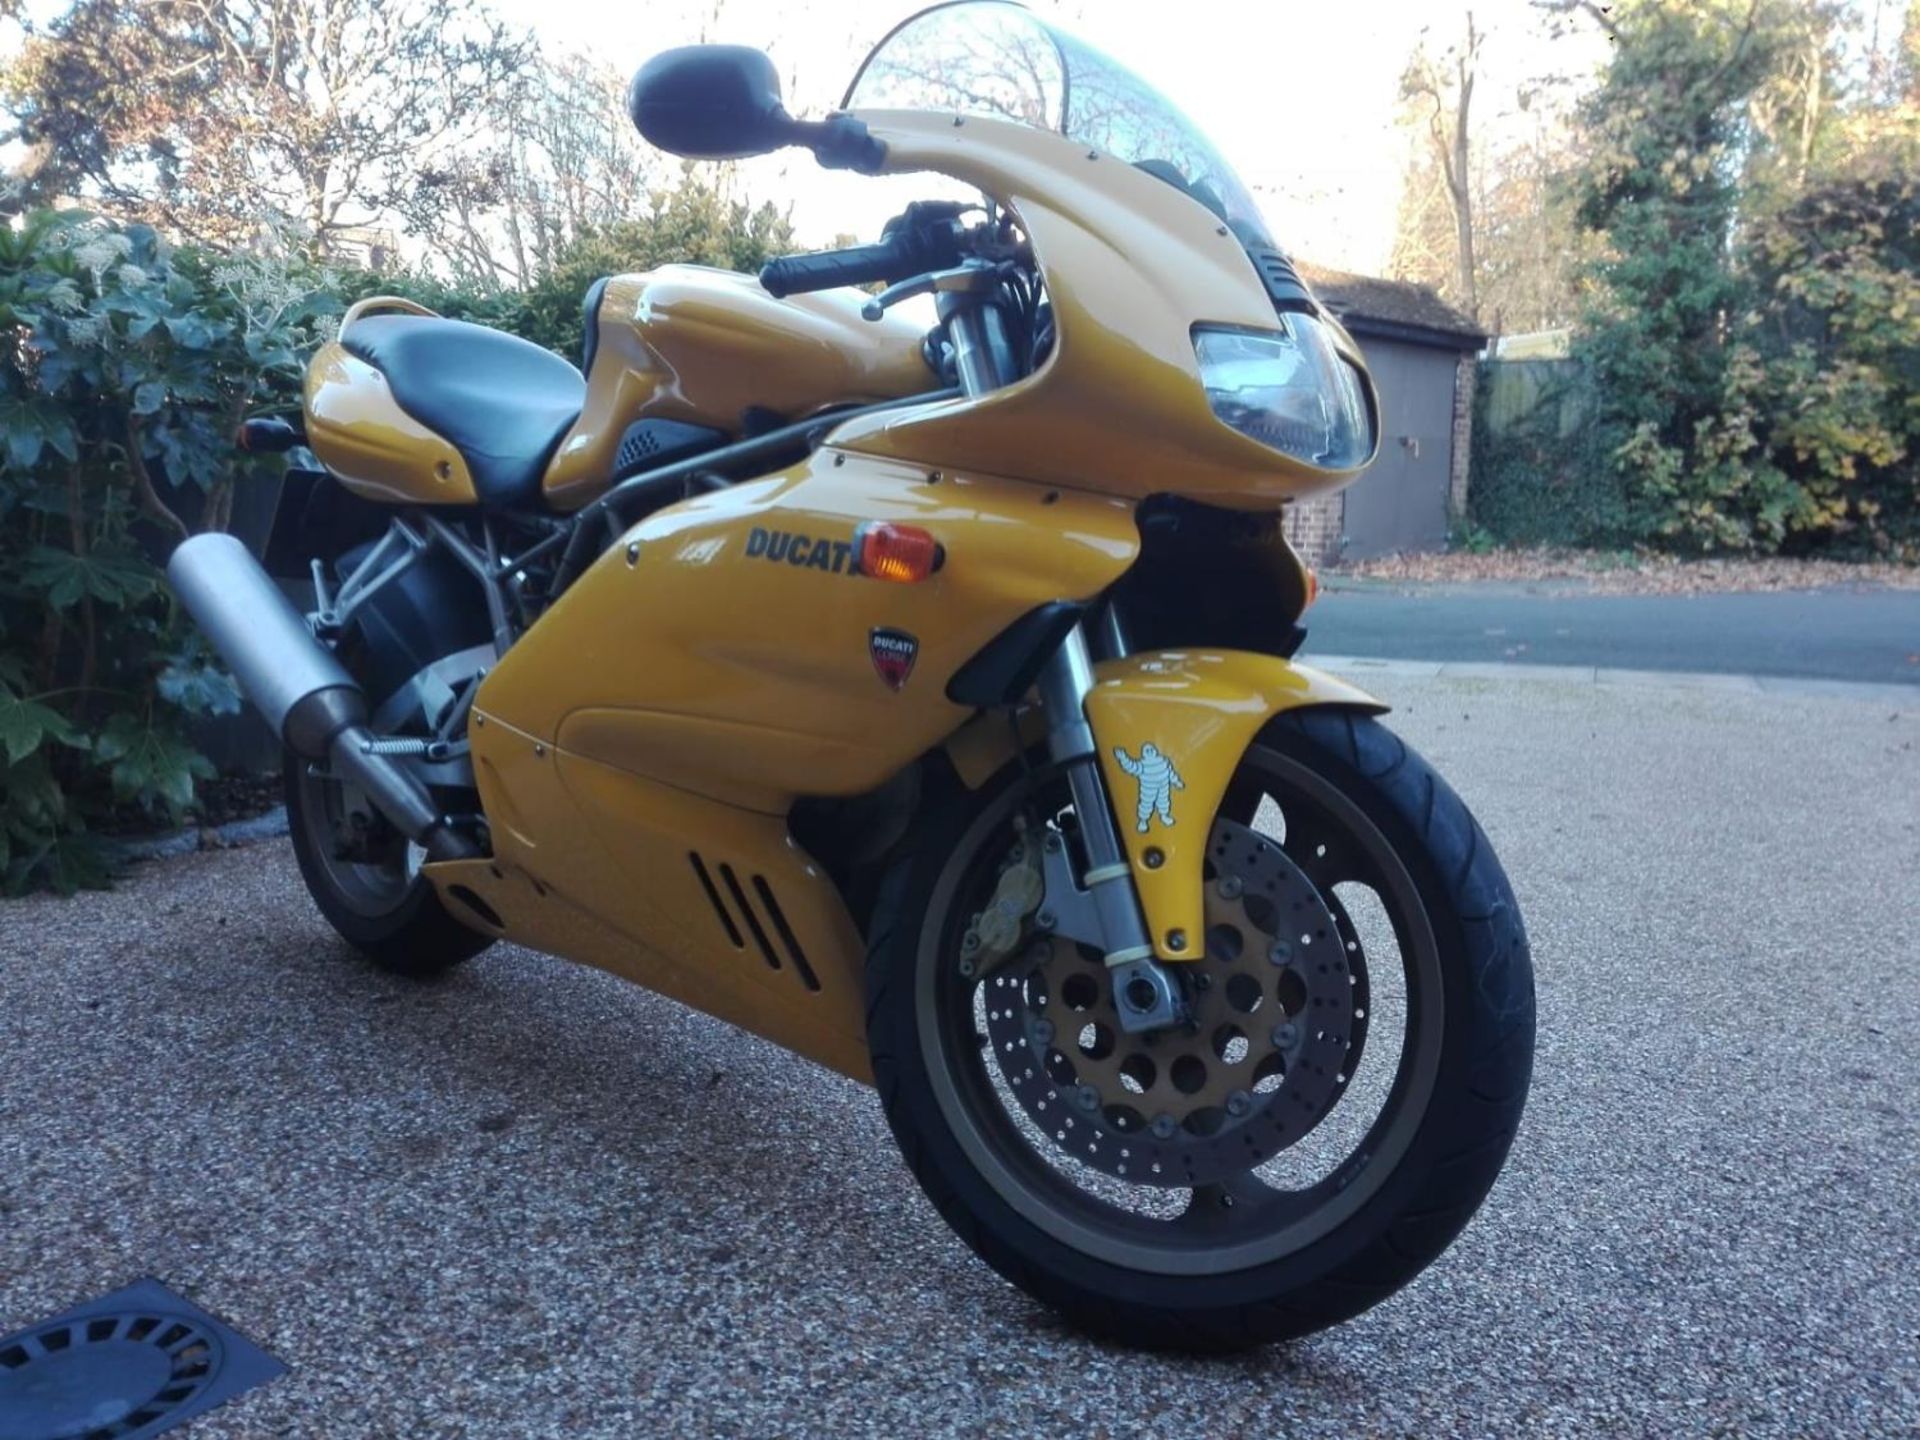 Ducati 900ss IE motorcycle. 1999. 904cc. 10,980 miles. MOT until April 2023. Runs and rides. Cambelt - Image 3 of 6